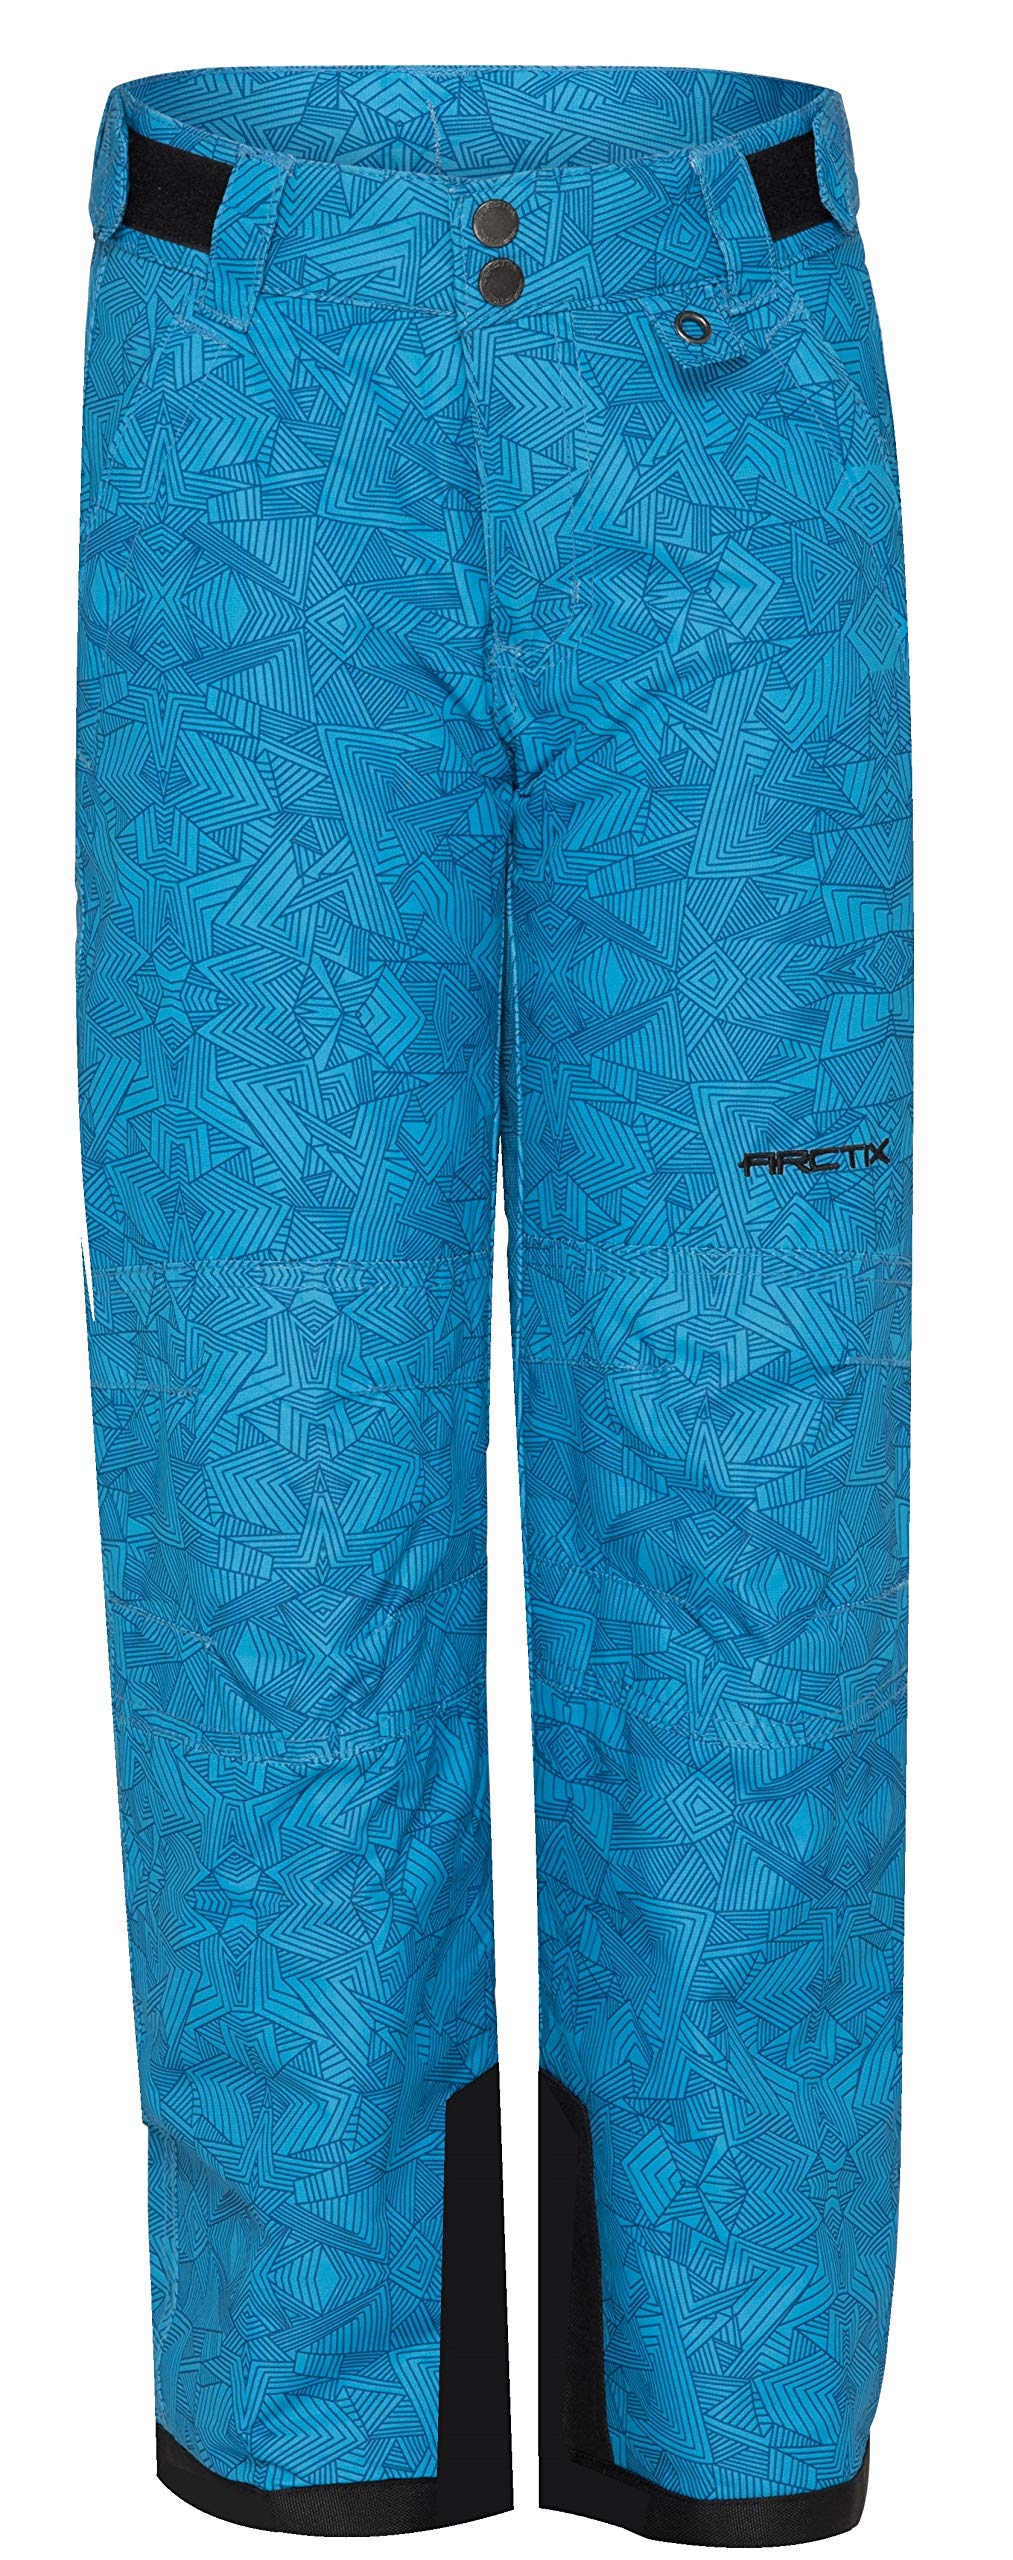 Arctix Unisex-Child Snow Pants with Reinforced Knees and Seat 